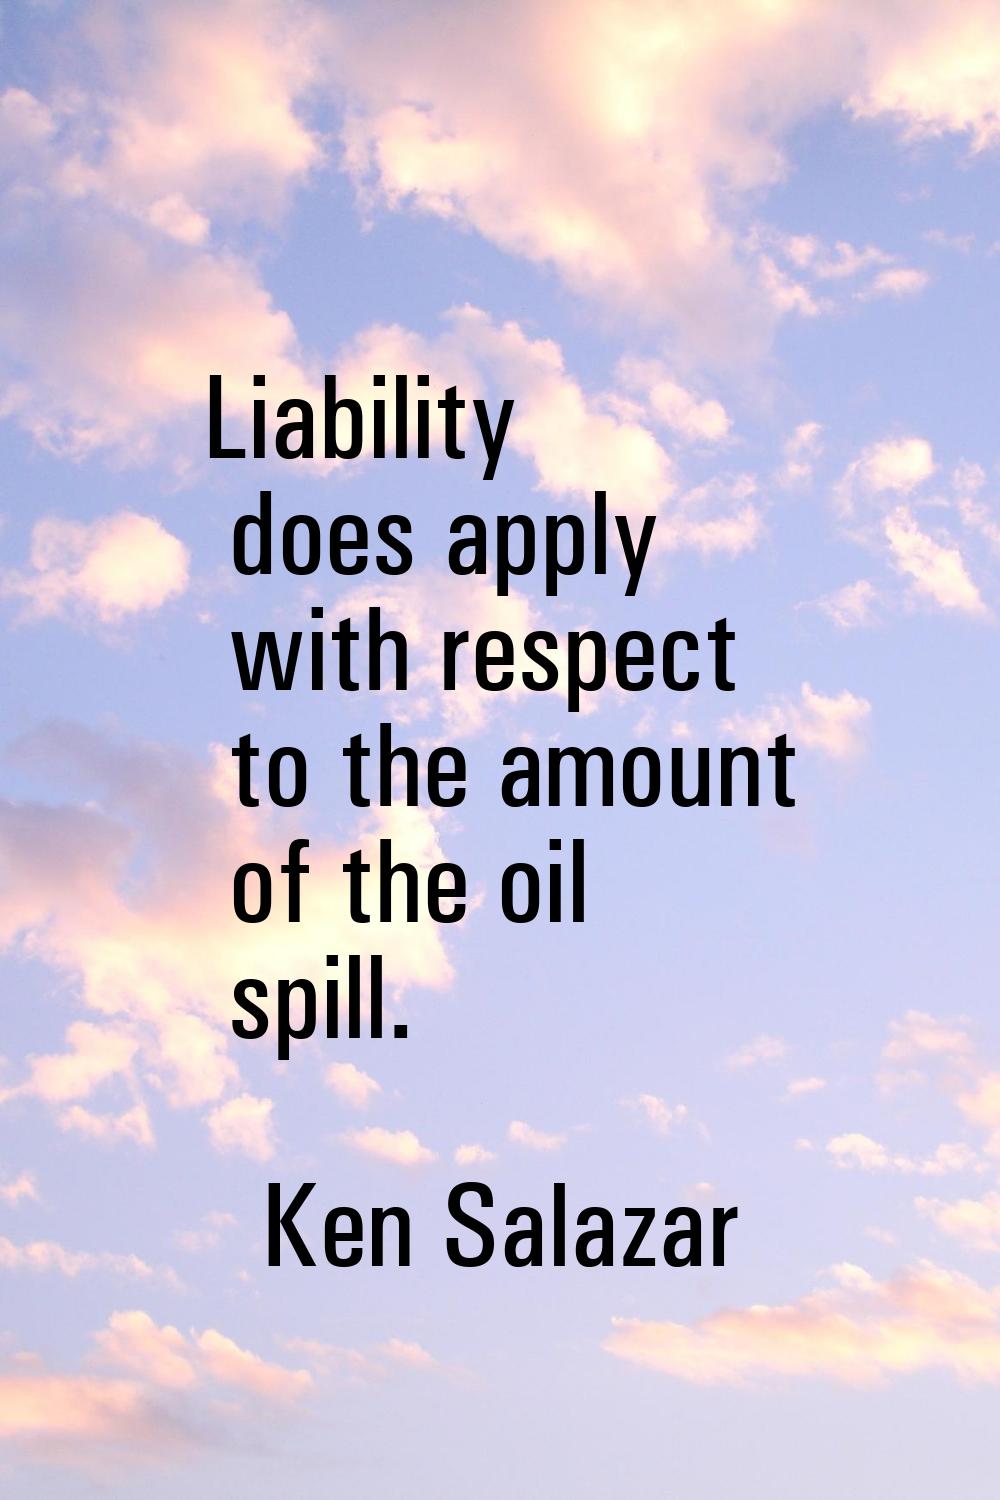 Liability does apply with respect to the amount of the oil spill.